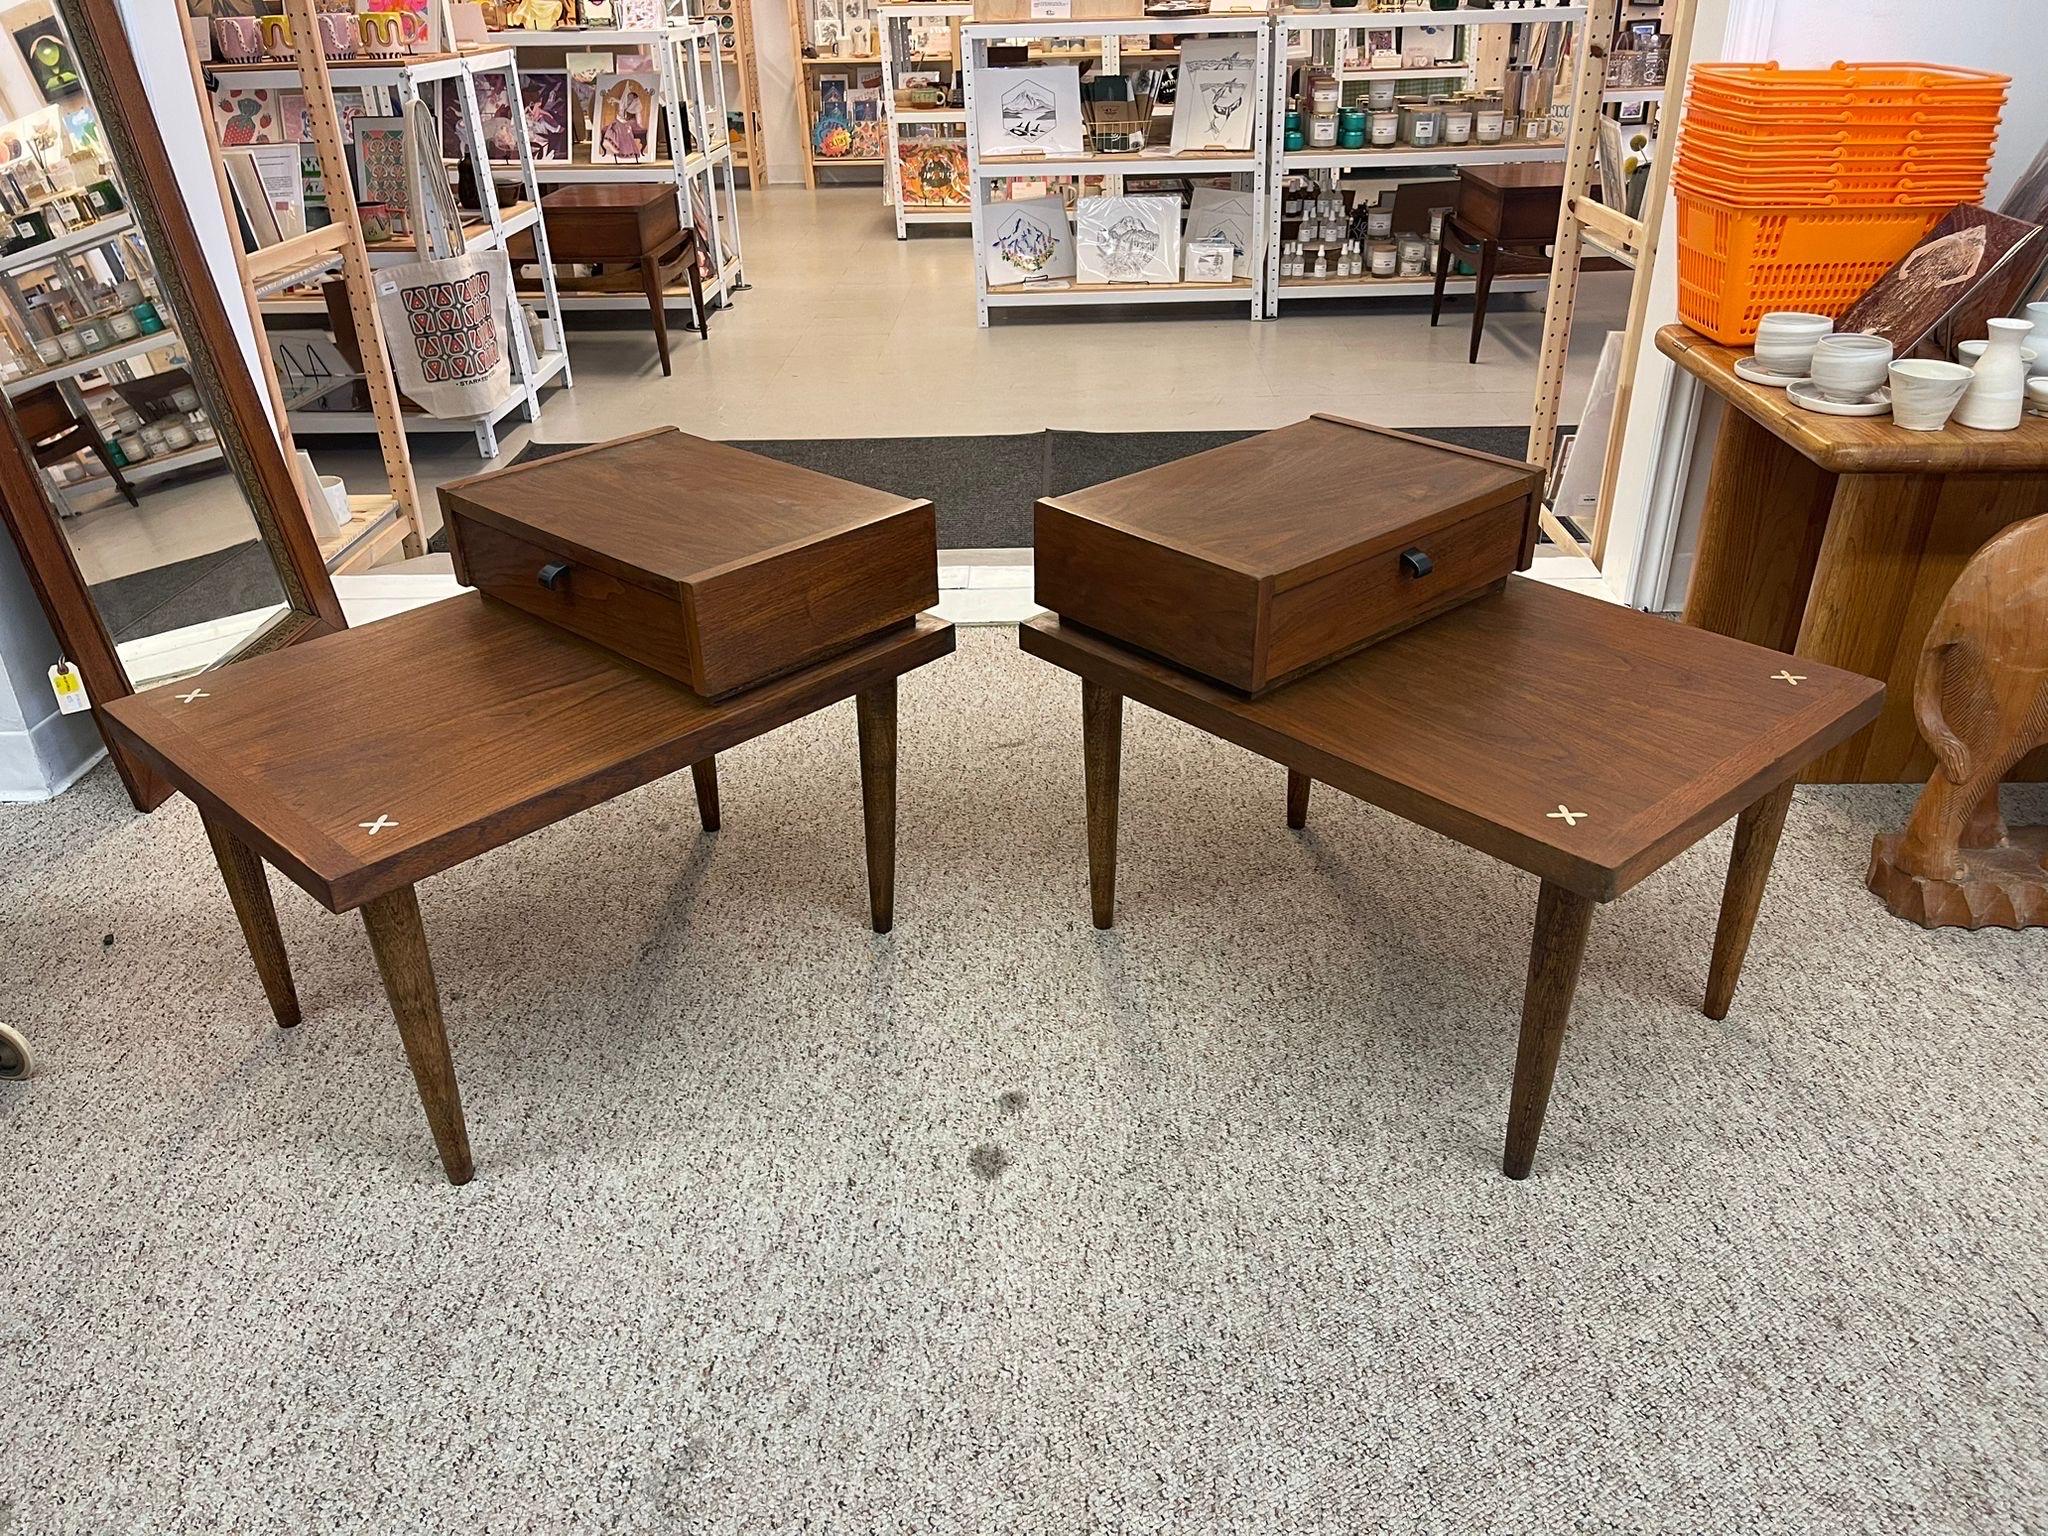 Silver toned metal inlays accent the top of this set. Walnut toned wood, with tapered legs. Metal pull handle to the single dovetailed dresser. Vintage Condition Consistent with Age as Pictured.

Dimensions. 28 W ; 20 D ; 21 1/2 H